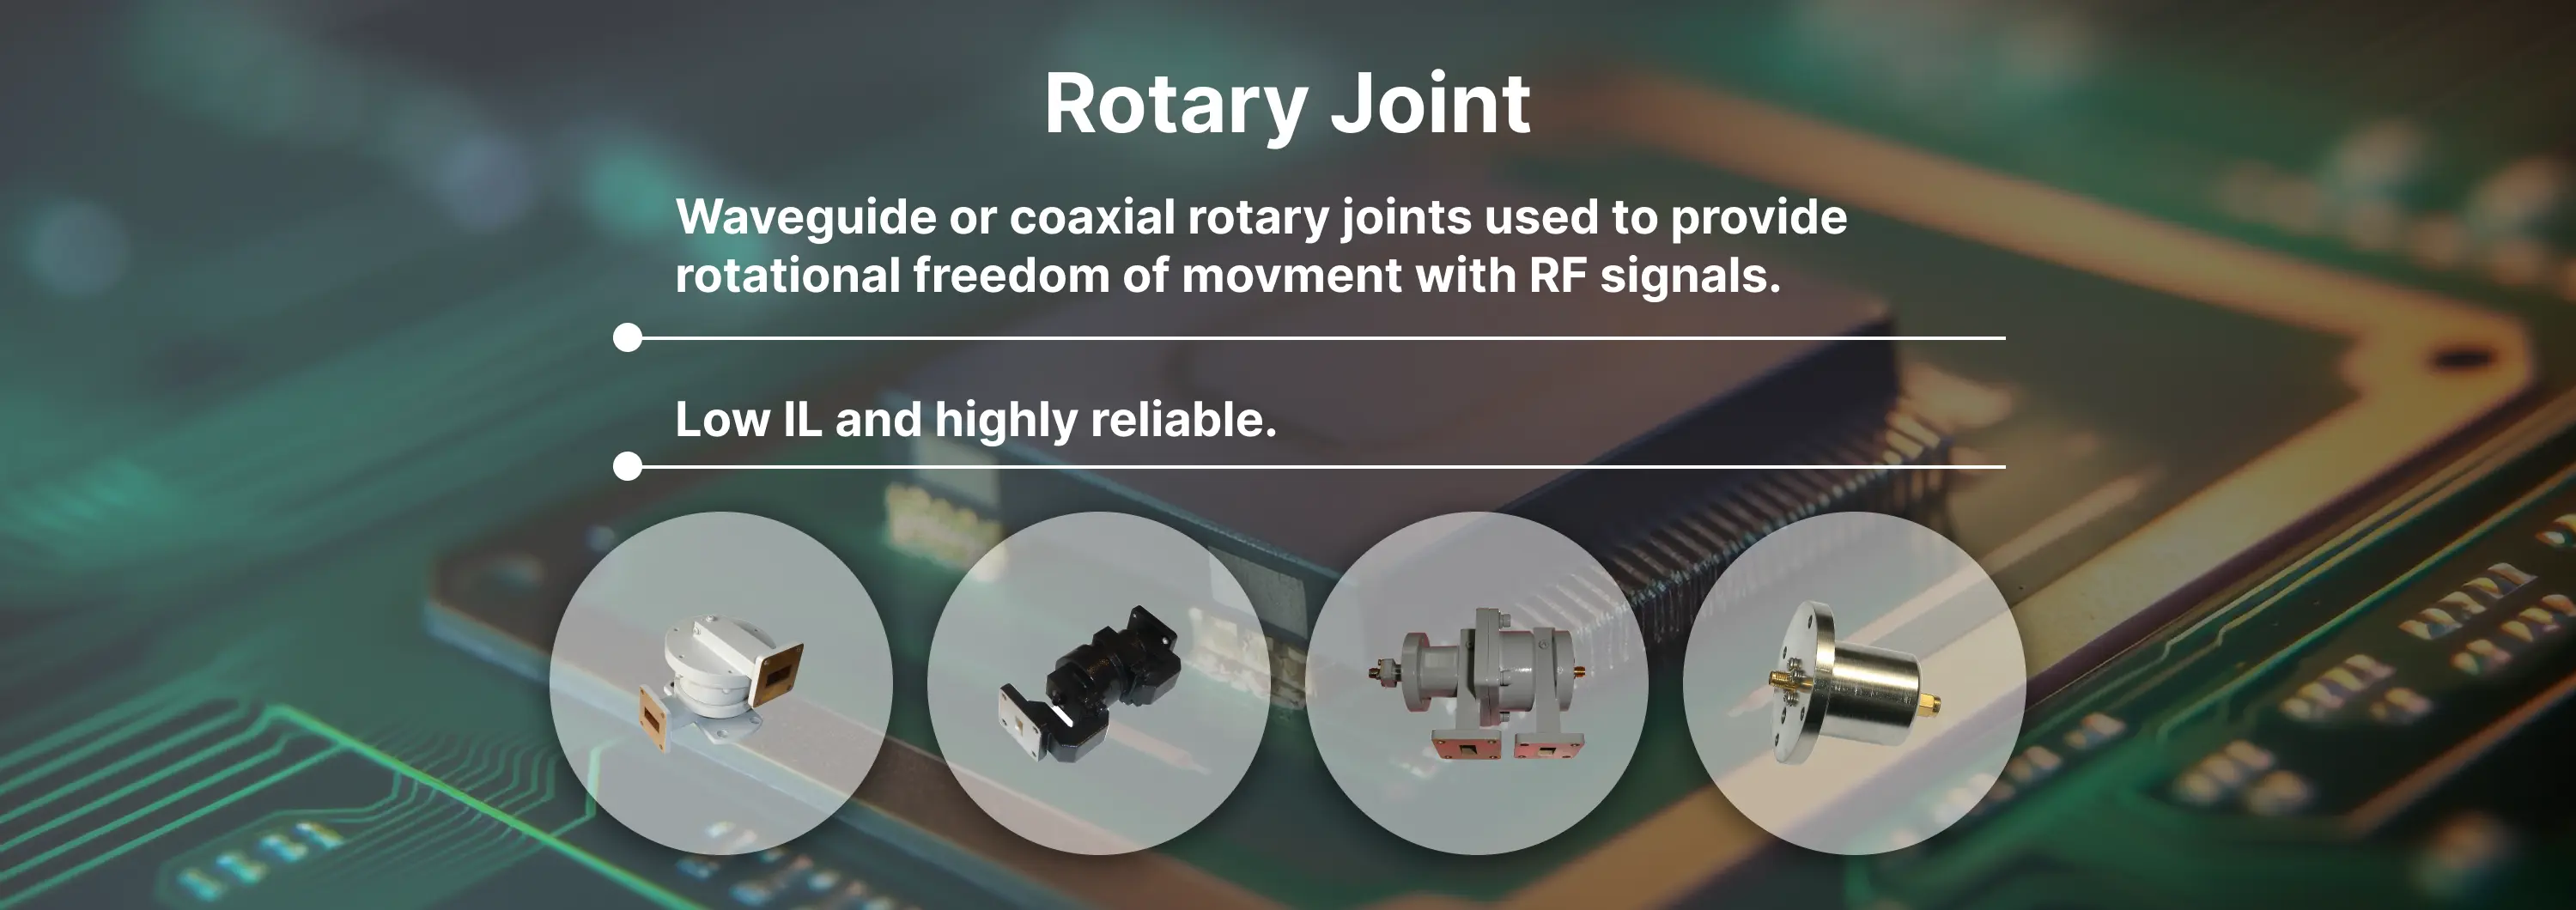 Rotary Joint Banner